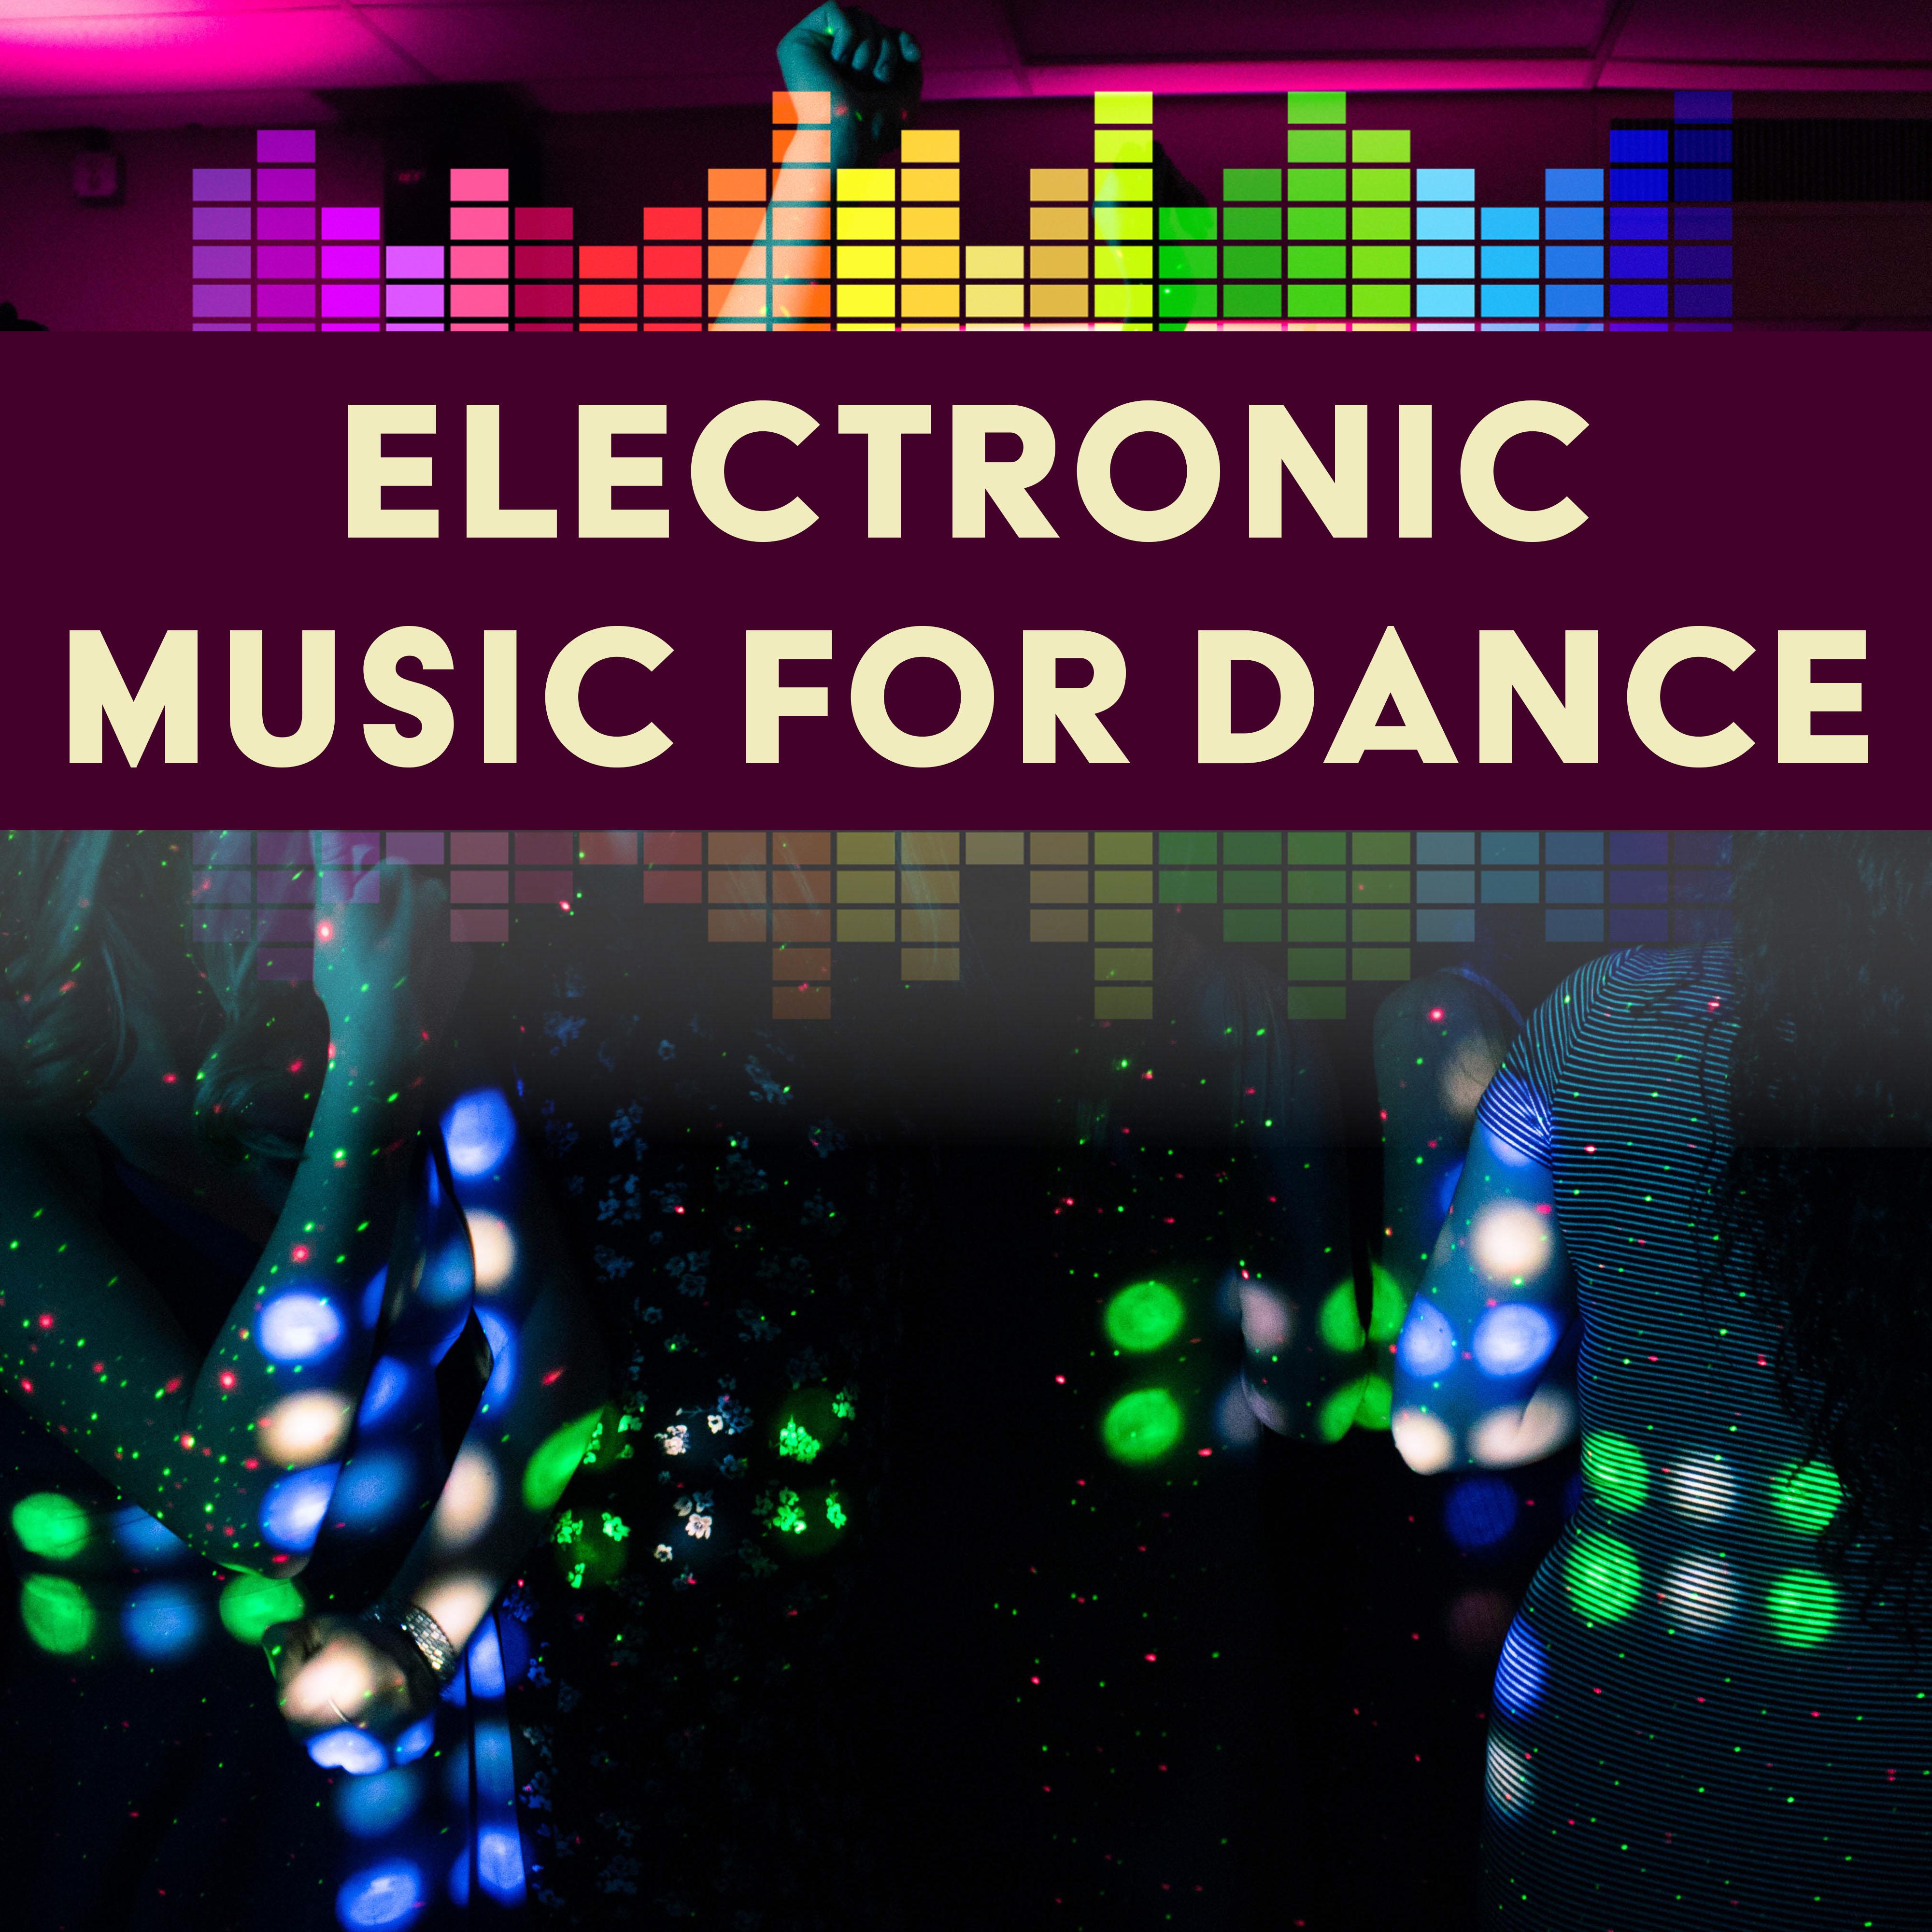 Electronic Music for Dance – Best Holiday Chill Out Music 2017, **** Vibes, Dancefloor, Ibiza Dance Party, Deep Lounge